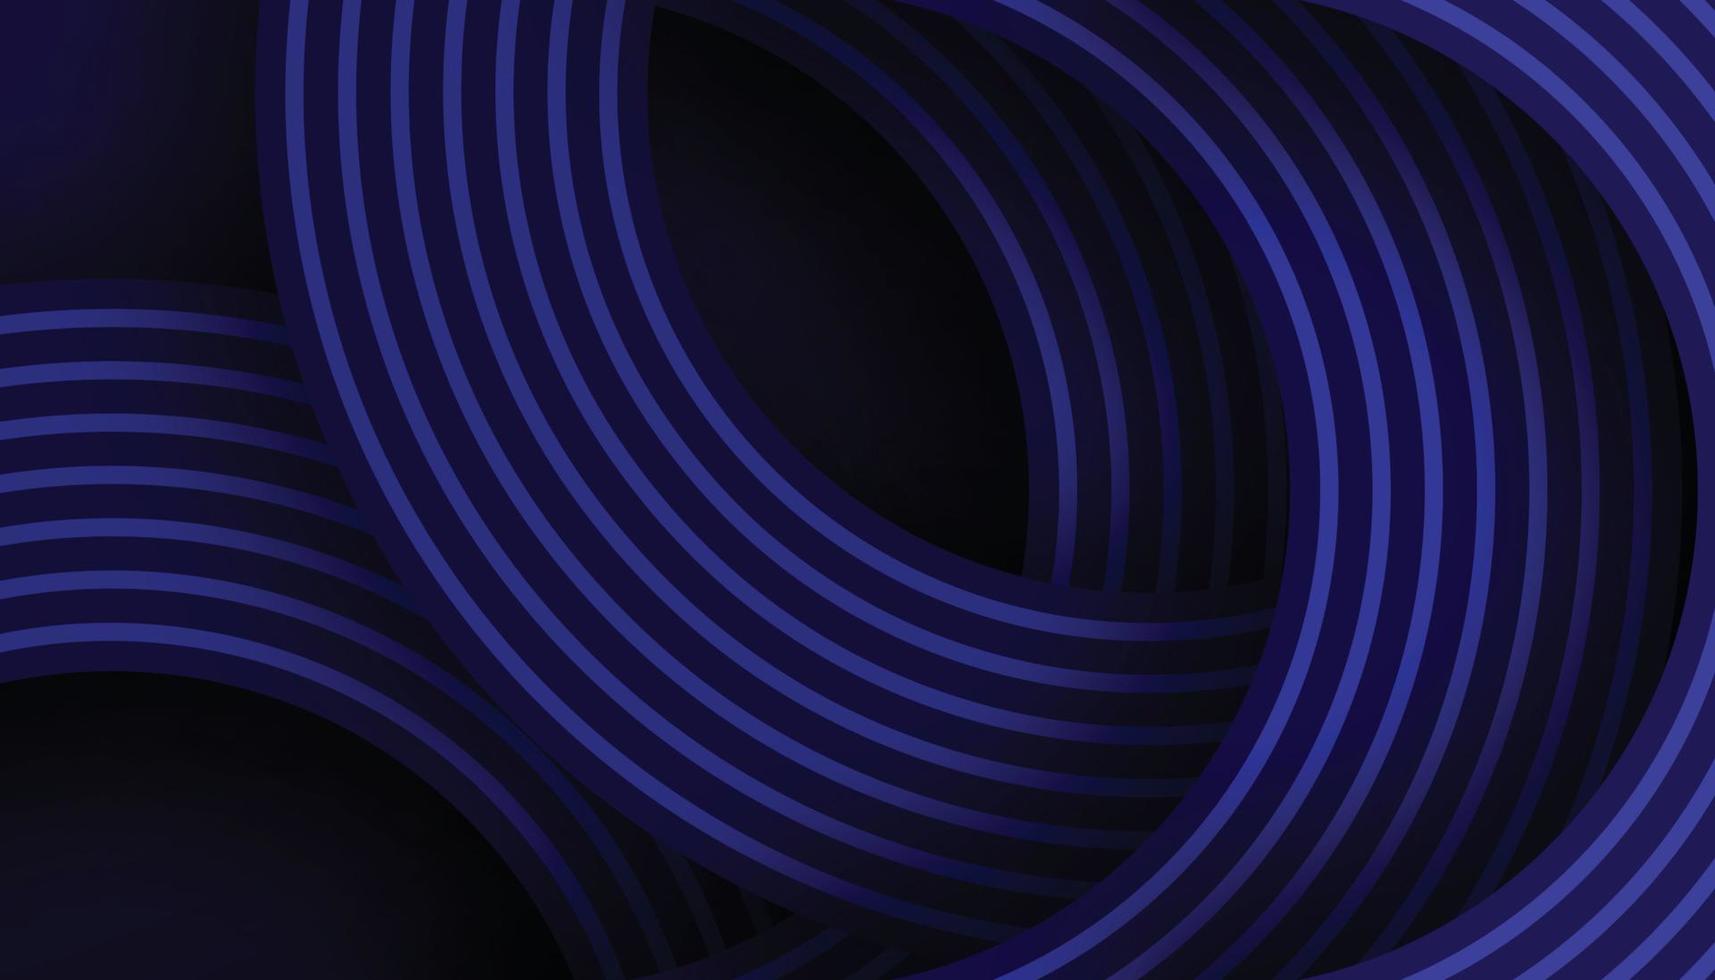 3D Modern Wave Line Abstract Black Background. Overlapping Blue Lines with Shadow on Dark Background. Vector Illustration